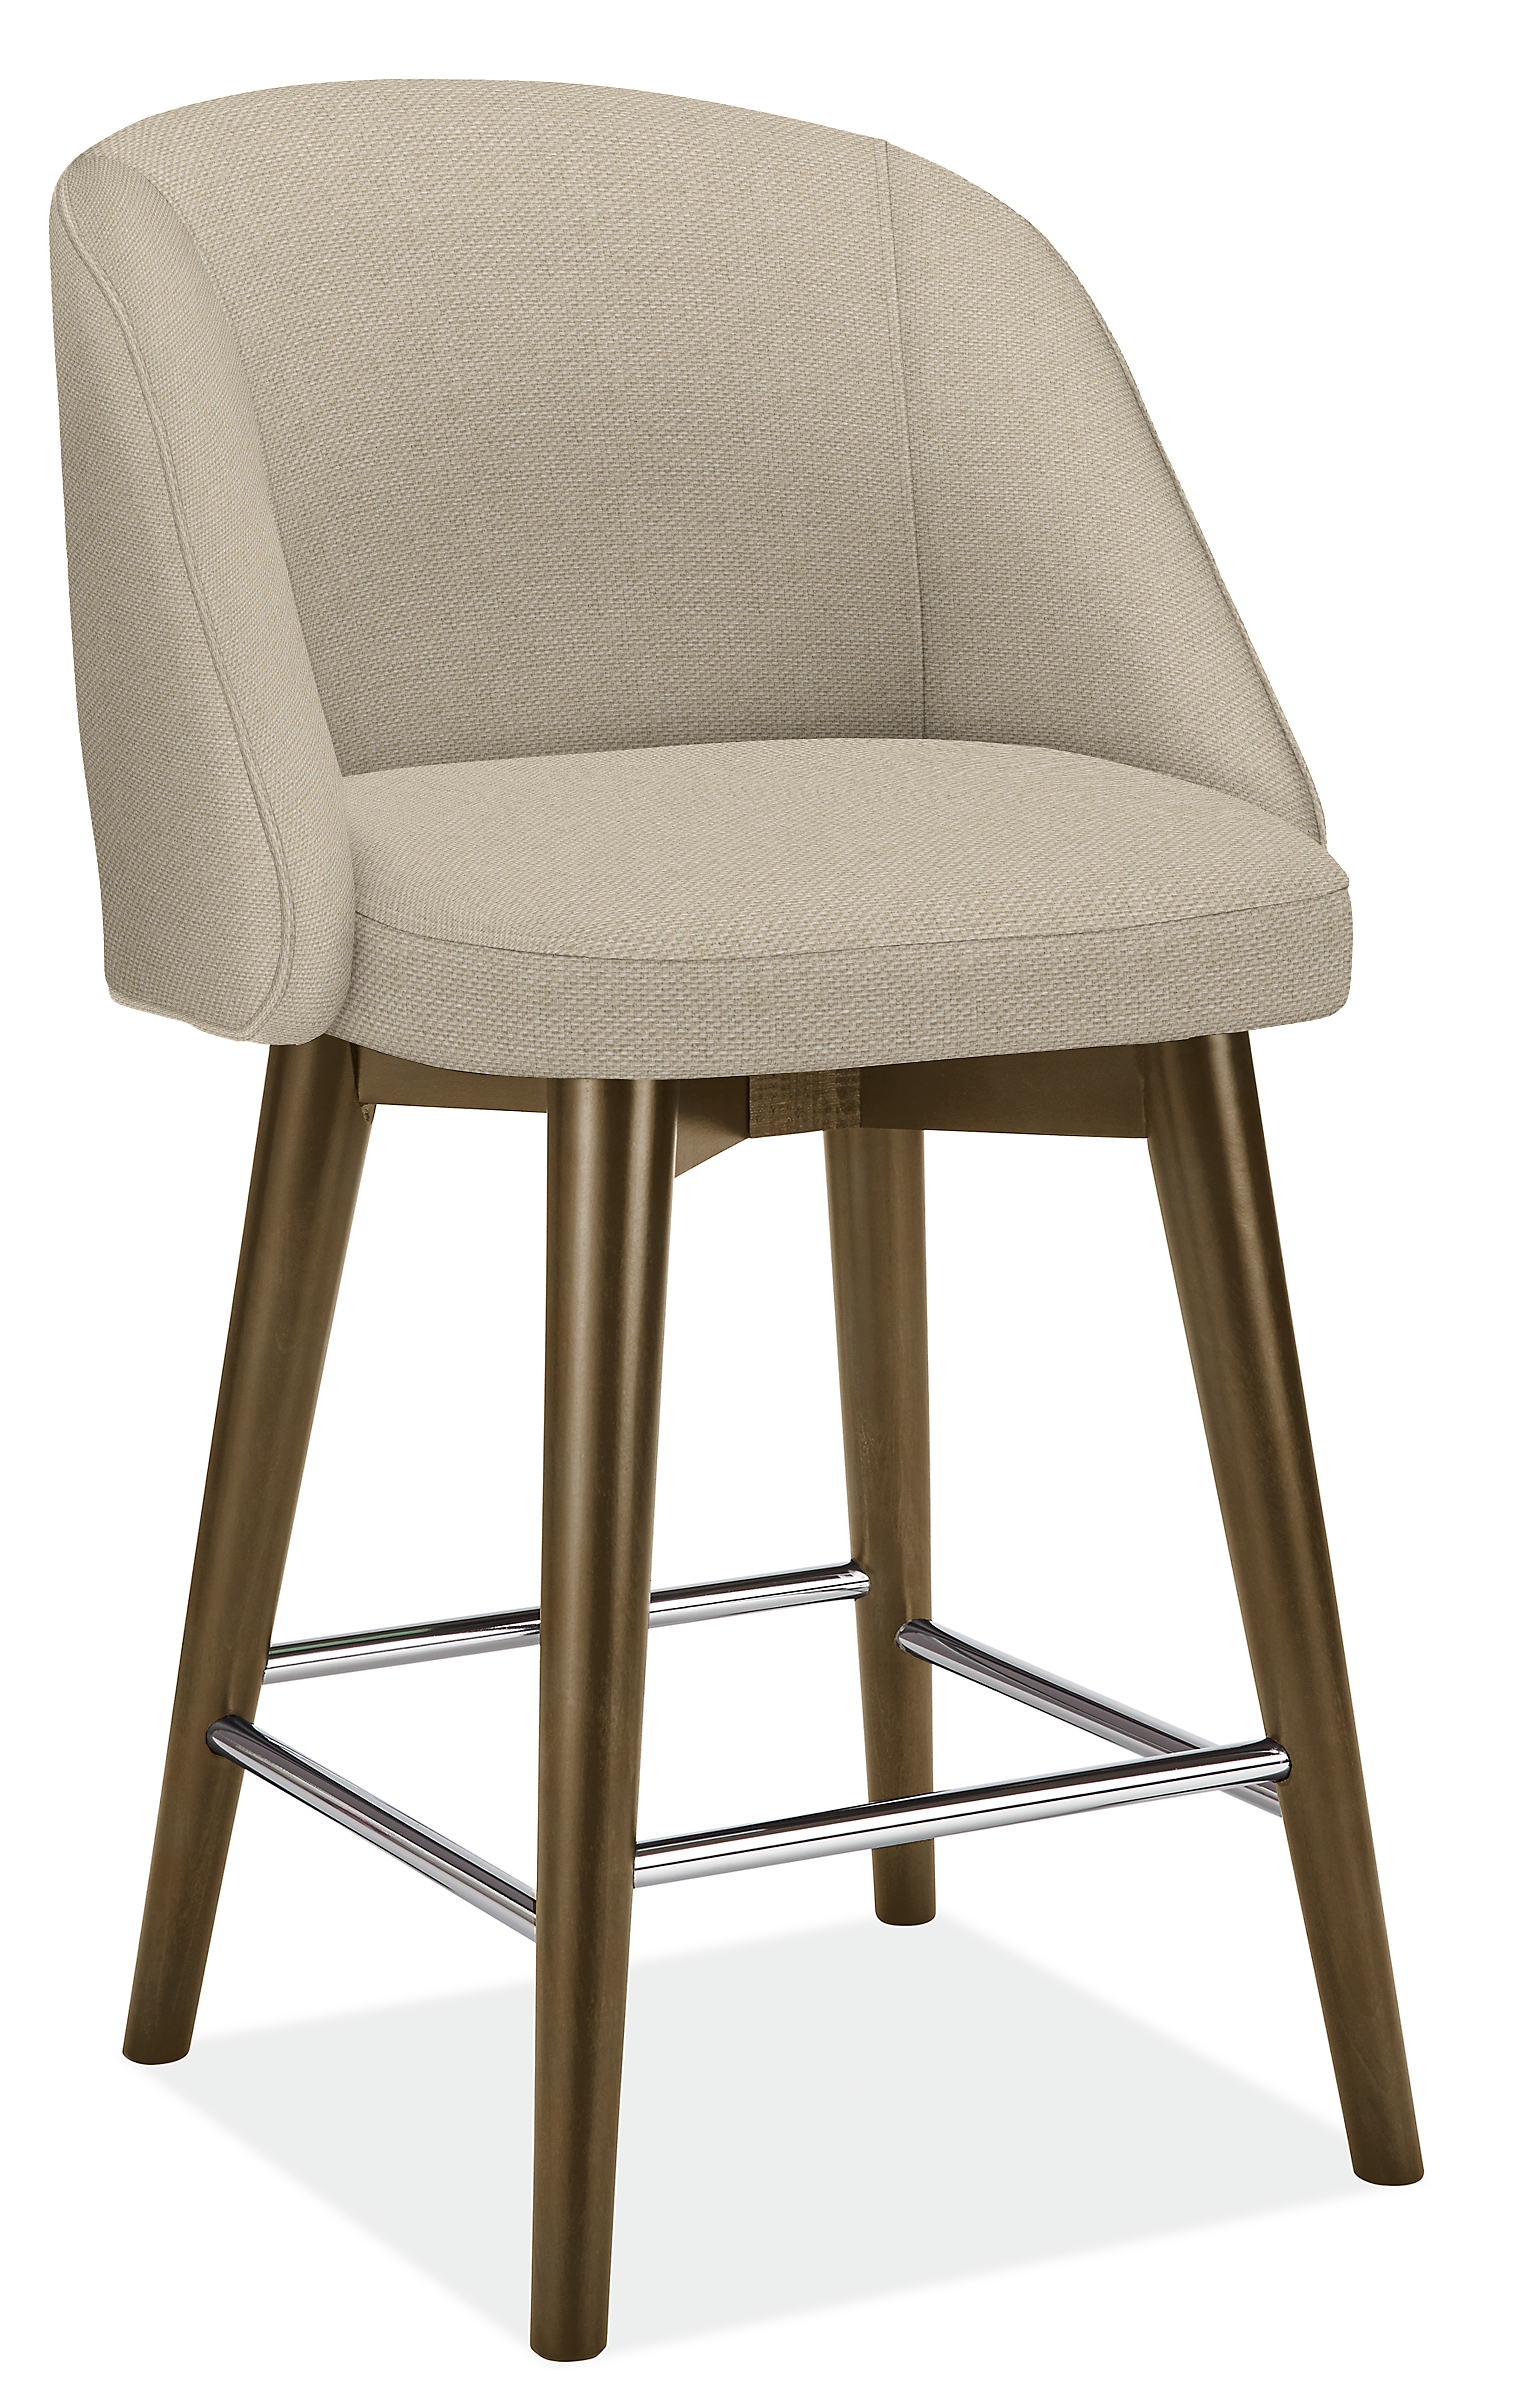 Cora Swivel Counter Stool in Arin Linen with Charcoal Legs